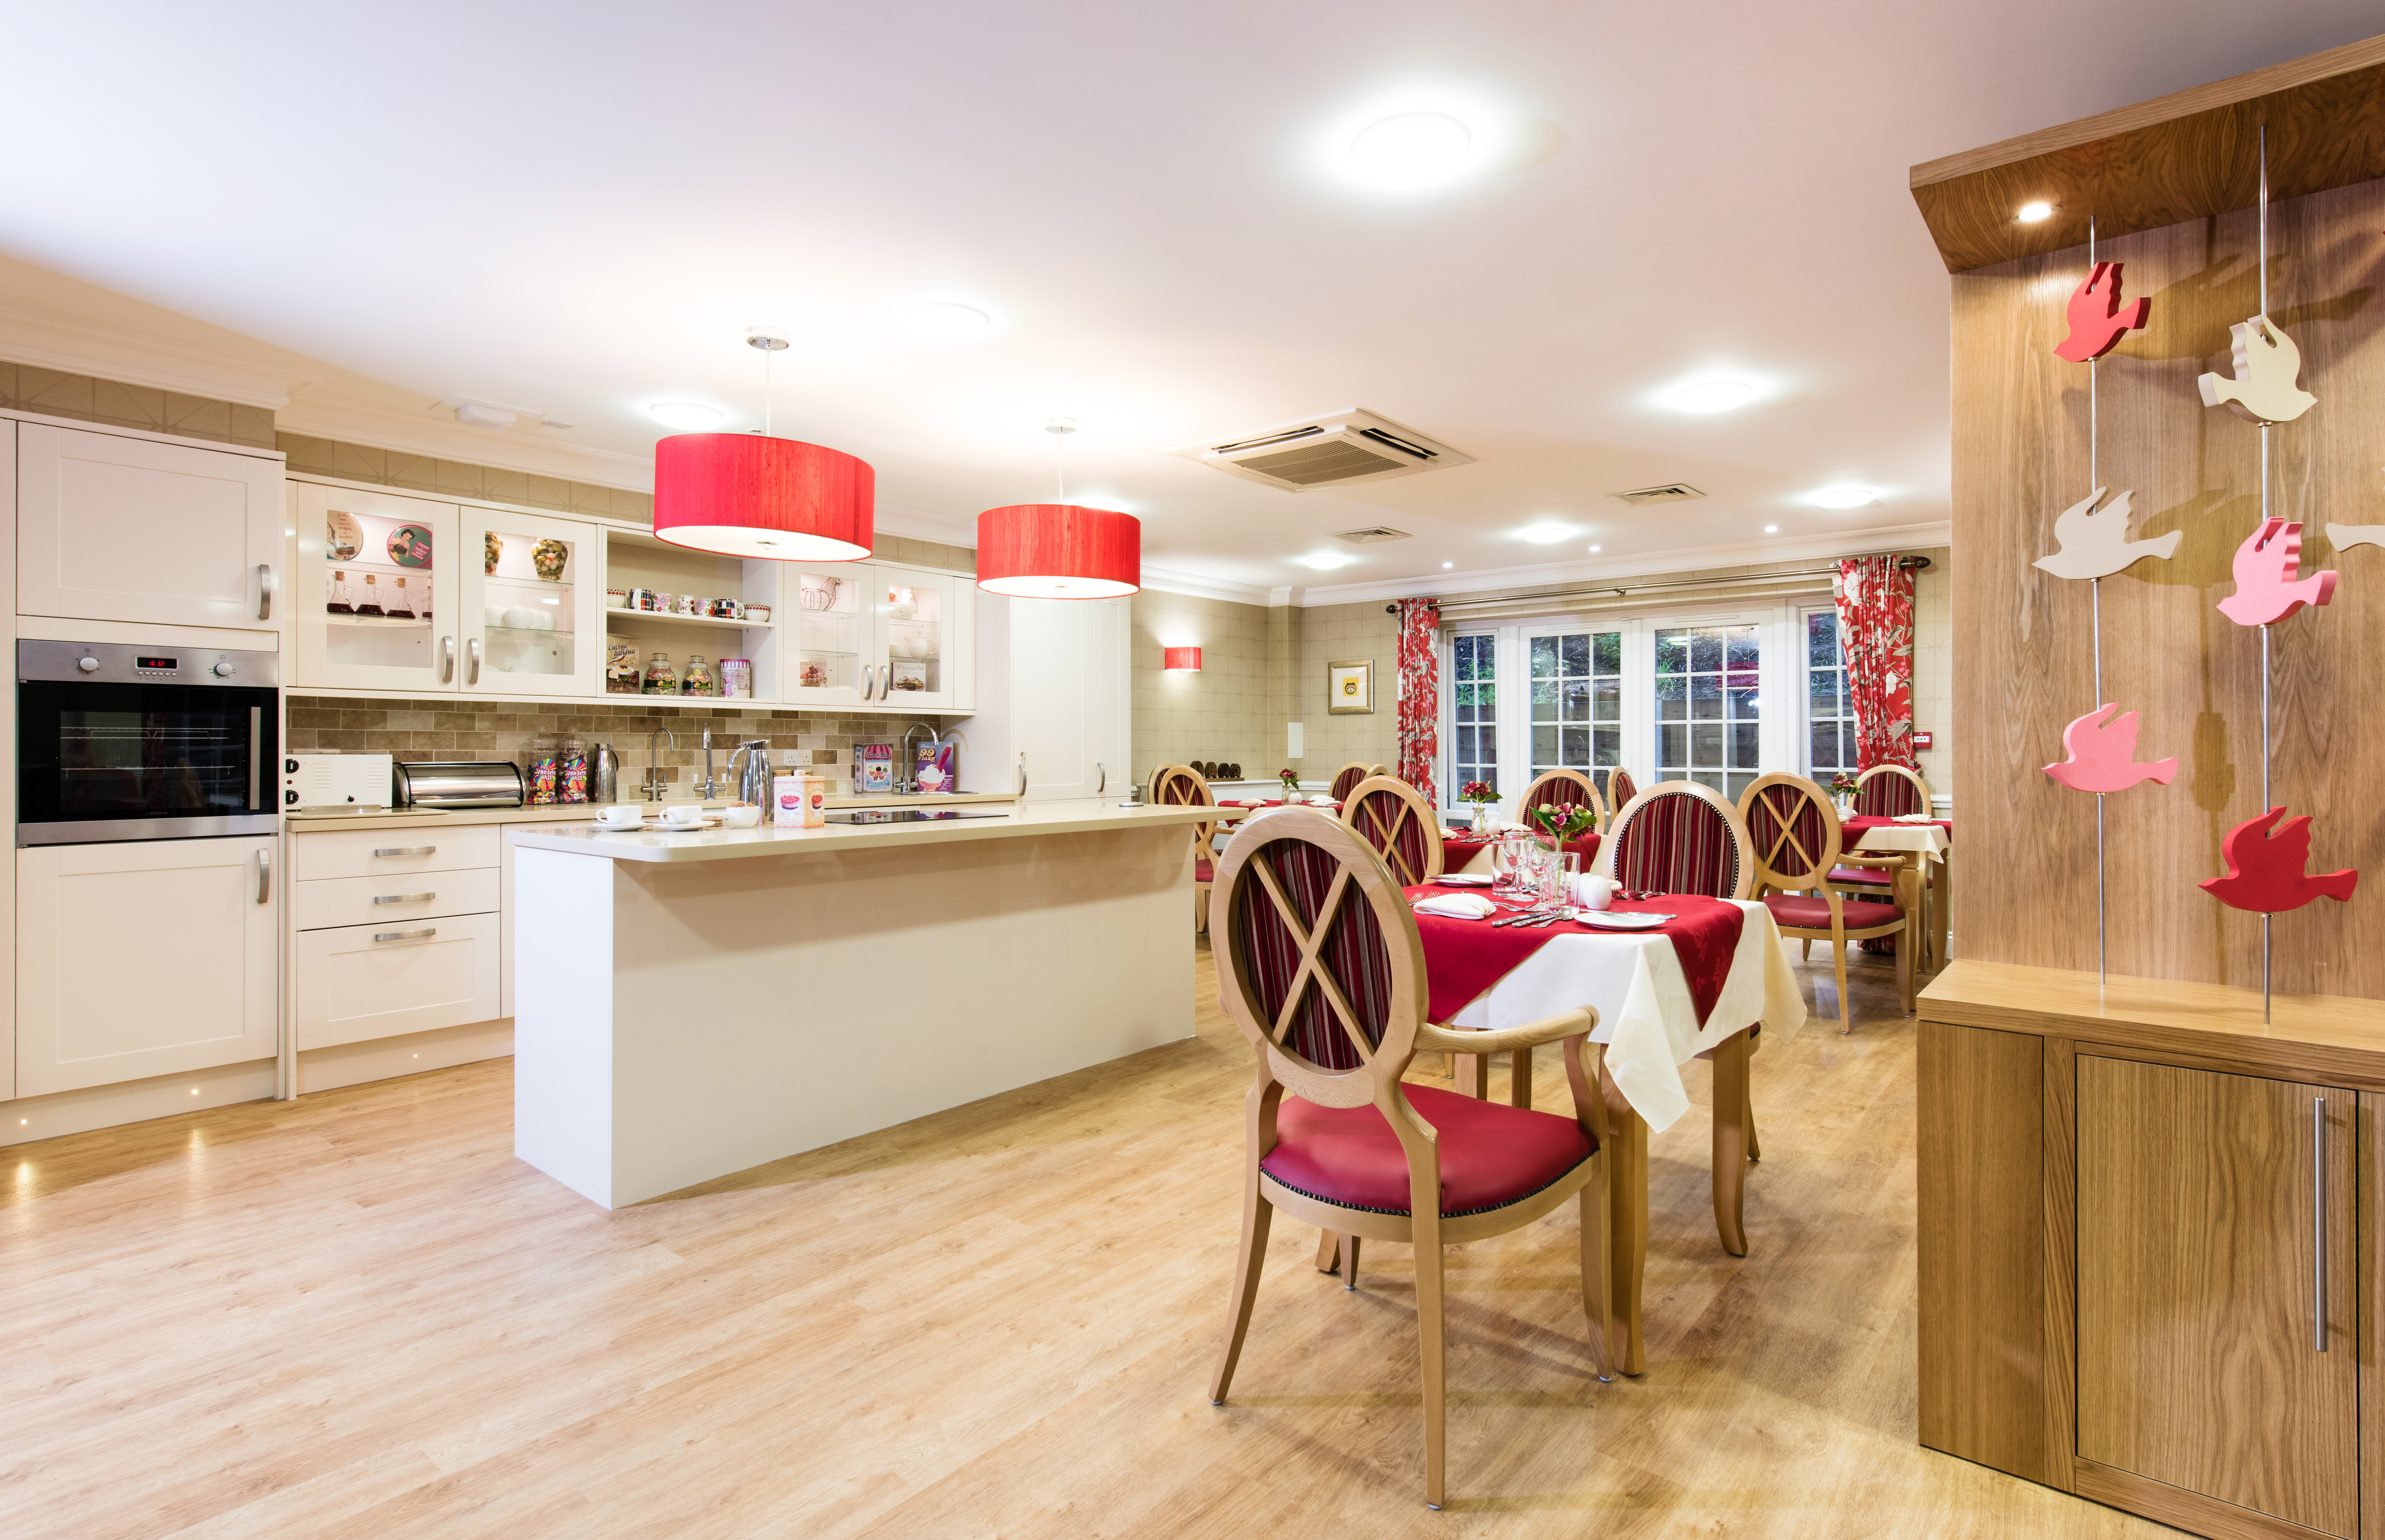 Hallmark Hardwood Flooring Reviews Of Lakeview Care Home Surrey Award Winning Care Homes In Surrey Inside Please Note that Weekly Fees Exclude